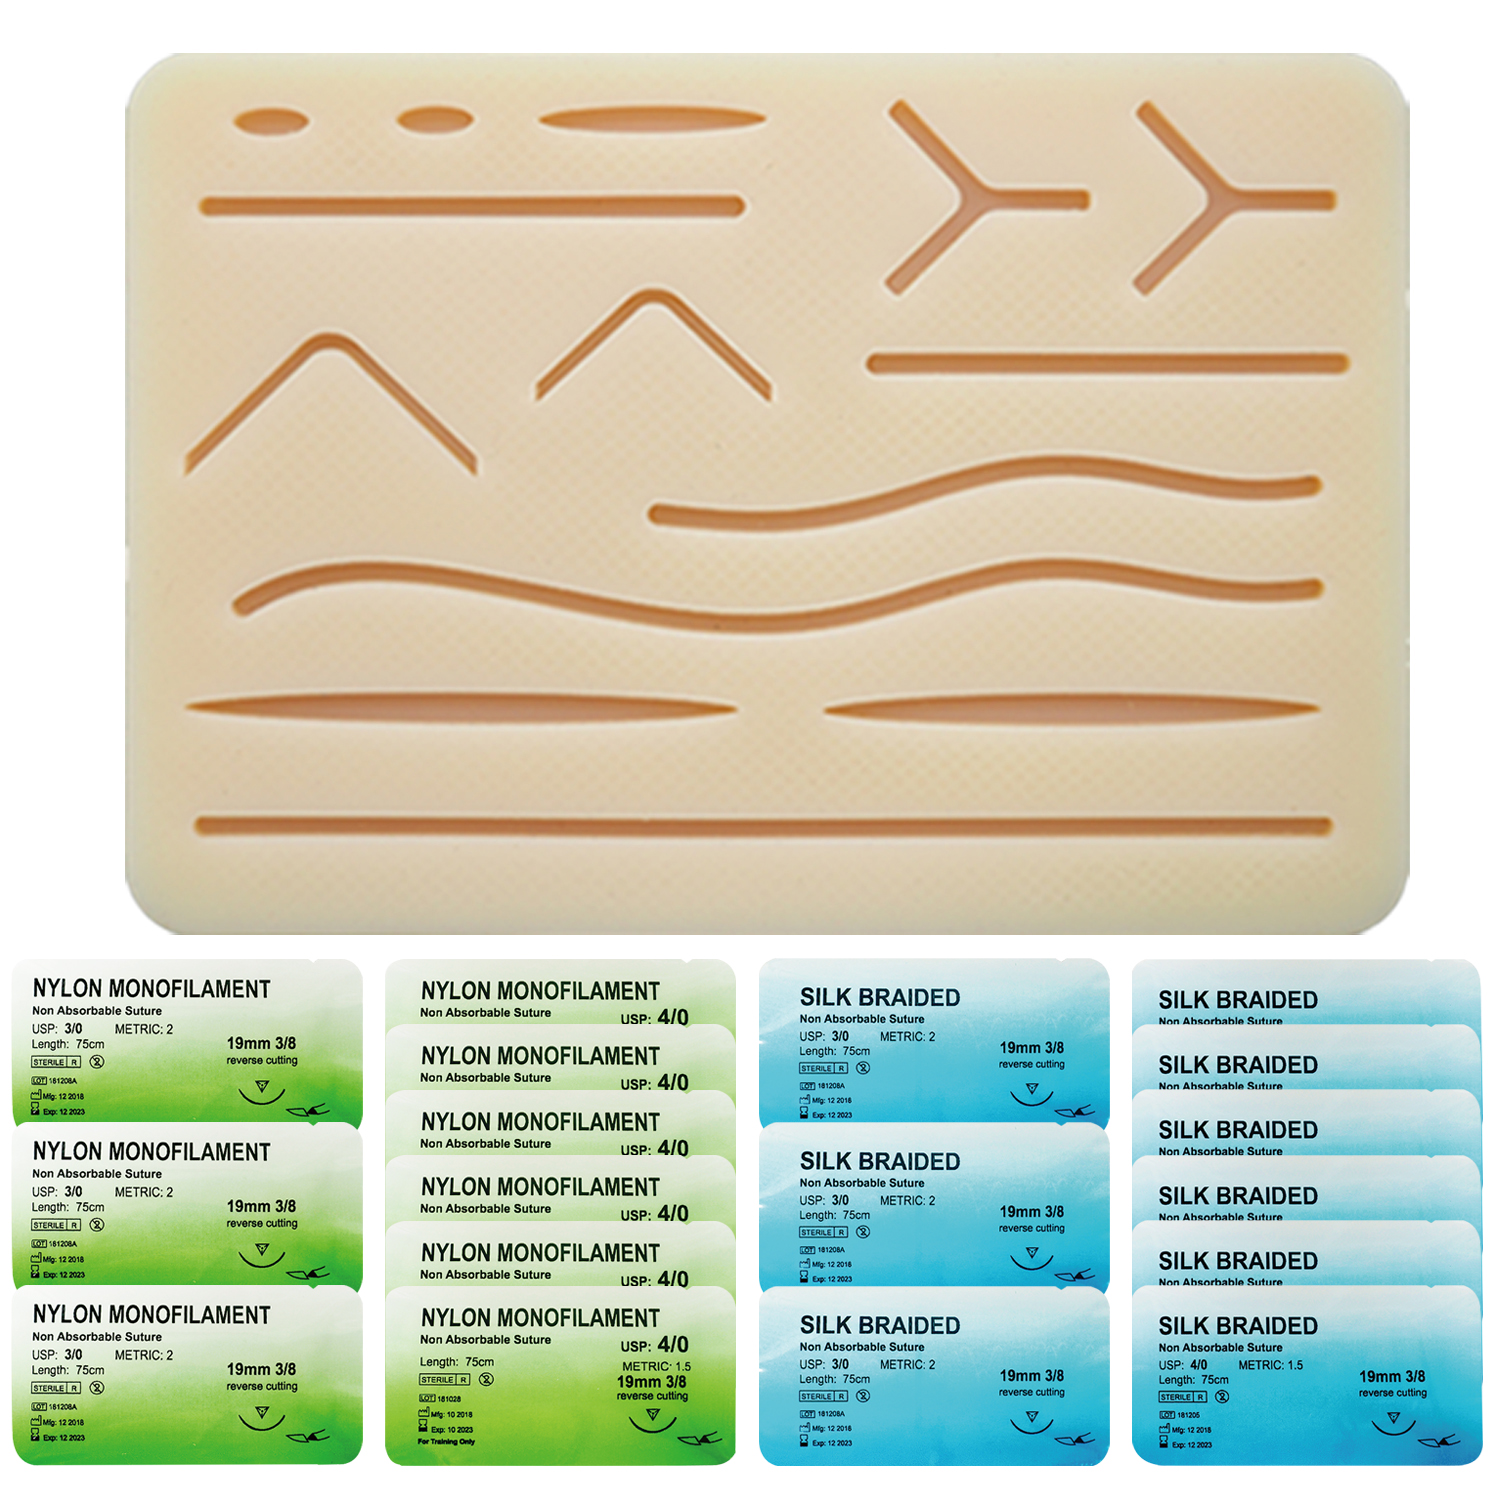 Ultrassist Suture Kit for Medical Students, Suture Stitching Kit with 19  Pre-Cut Wounds, Suture Instruments, Various Suture Threads and Needles,  Ideal Practice Suture Training Kit (Education Use Only): :  Industrial & Scientific